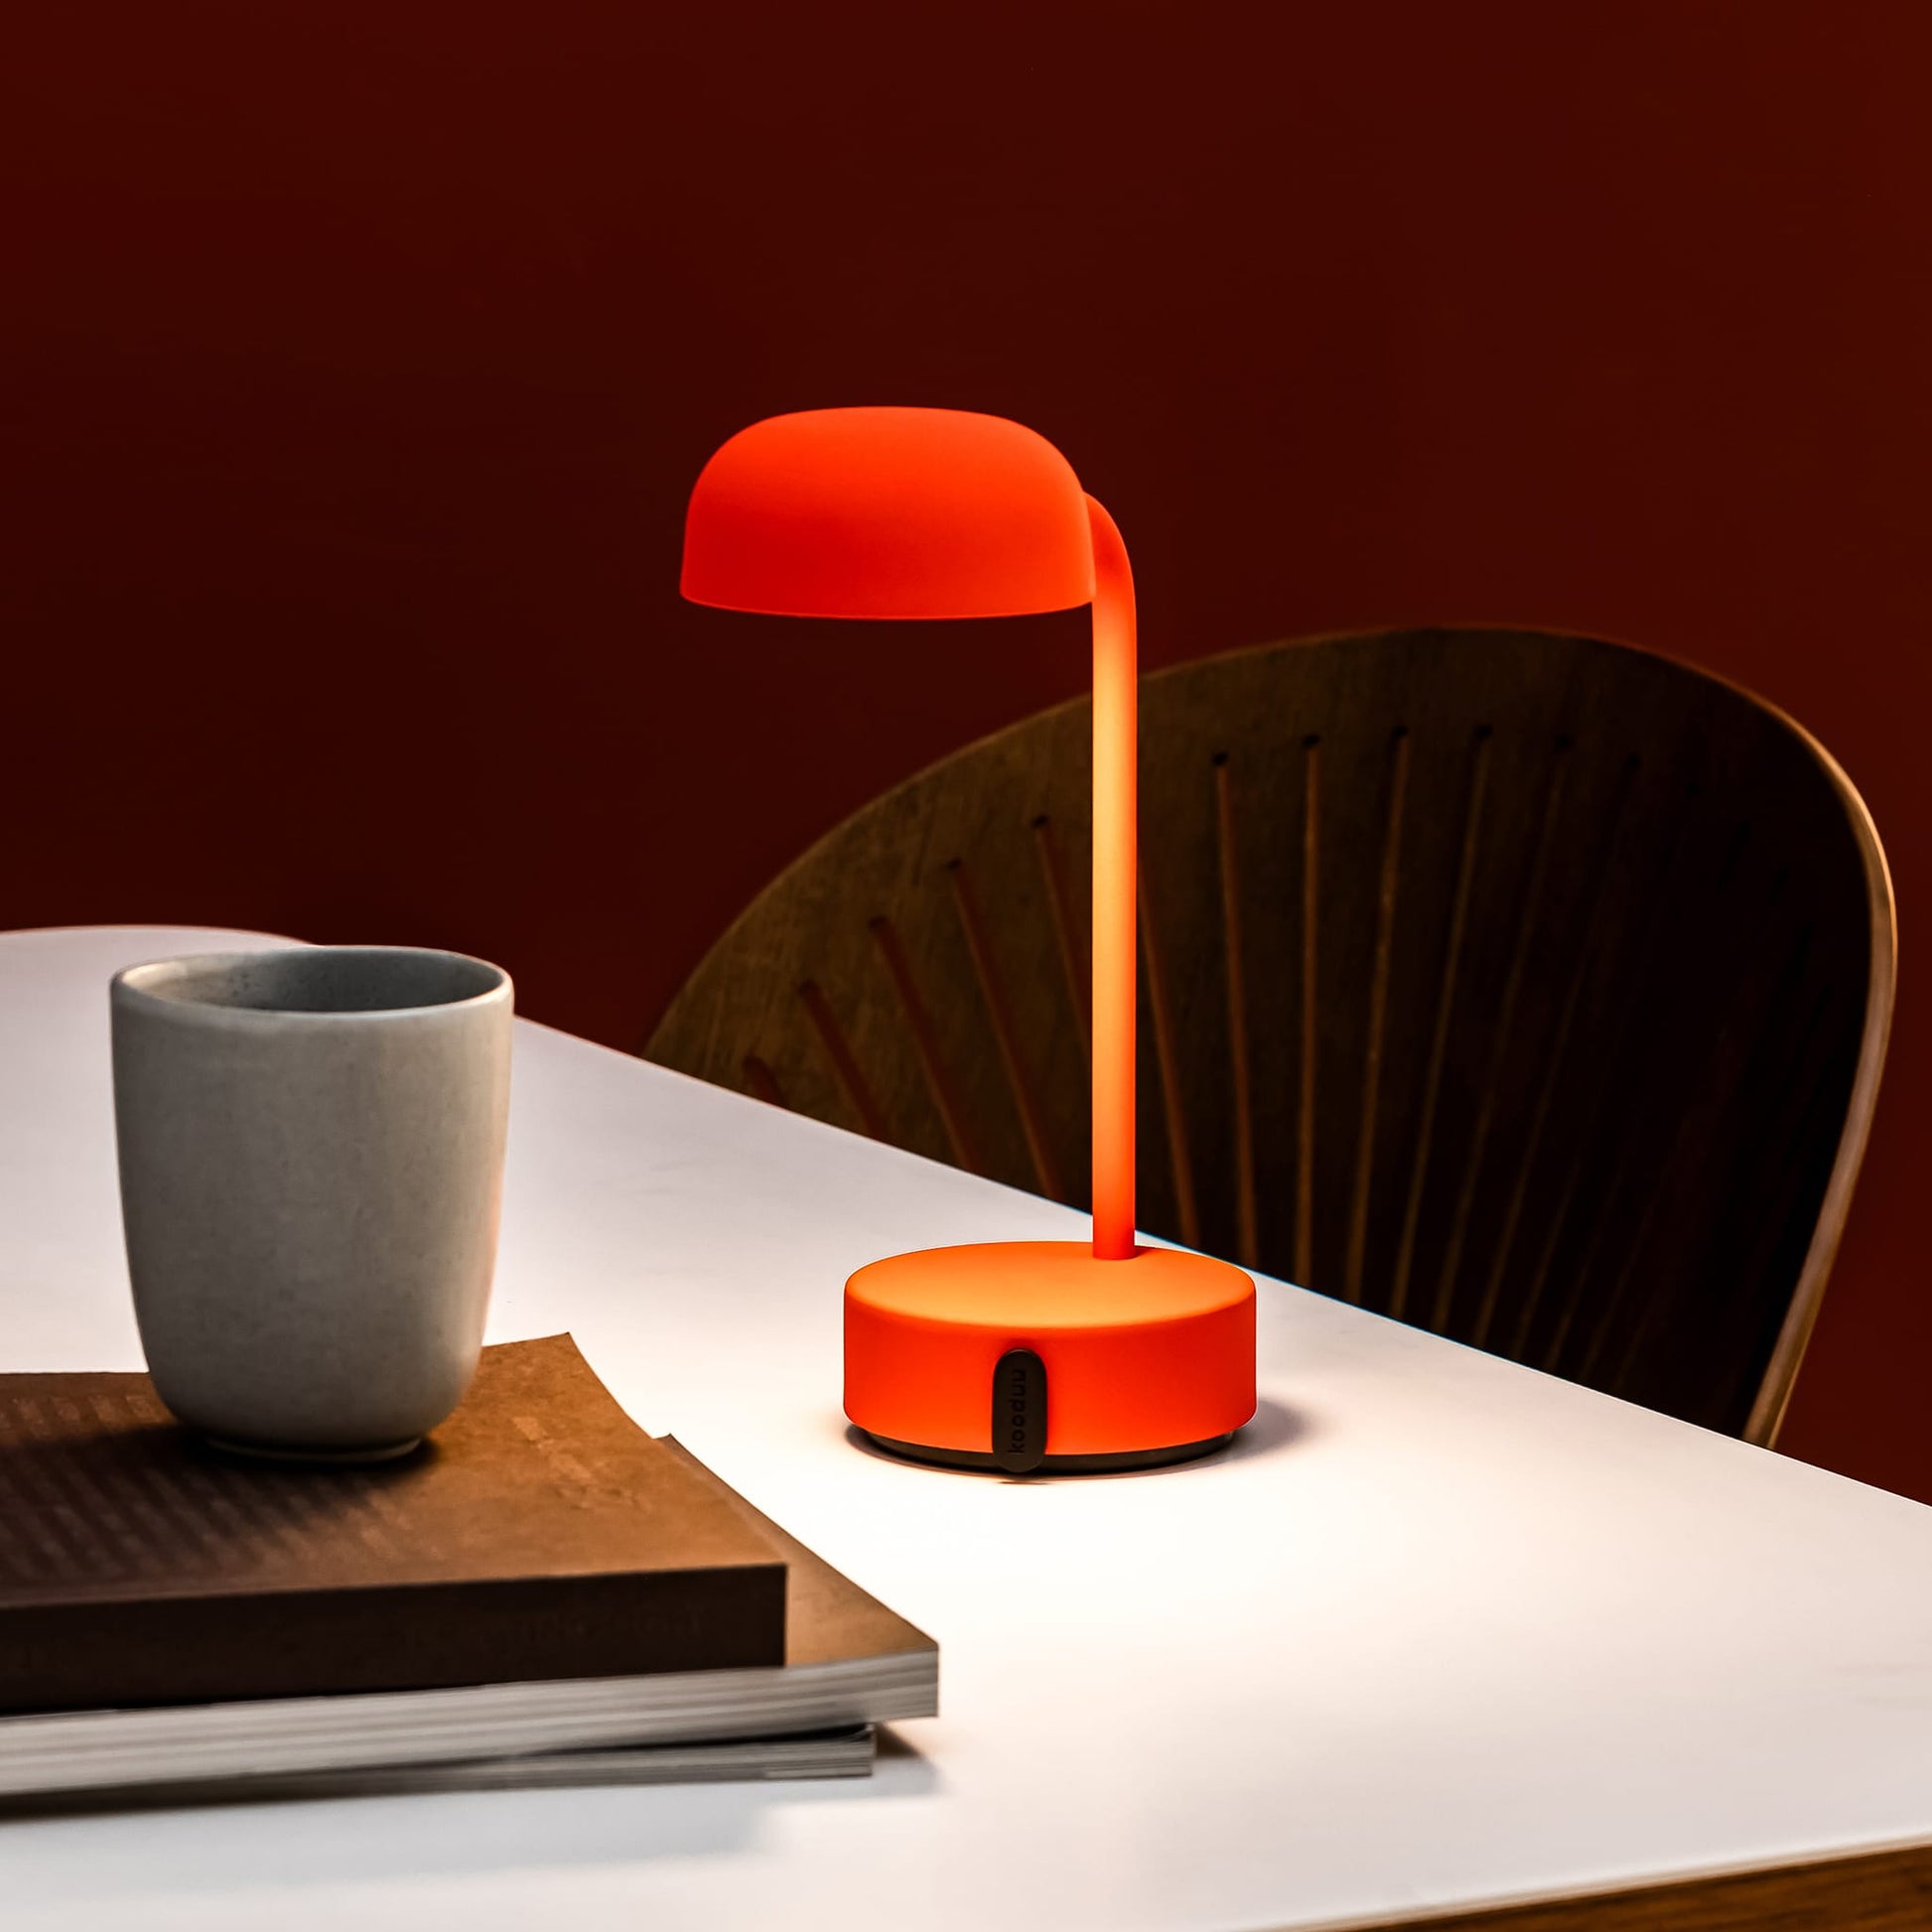 Fokus Orange by Kooduu, rechargeable LED lamp for work and leisure in Canada.